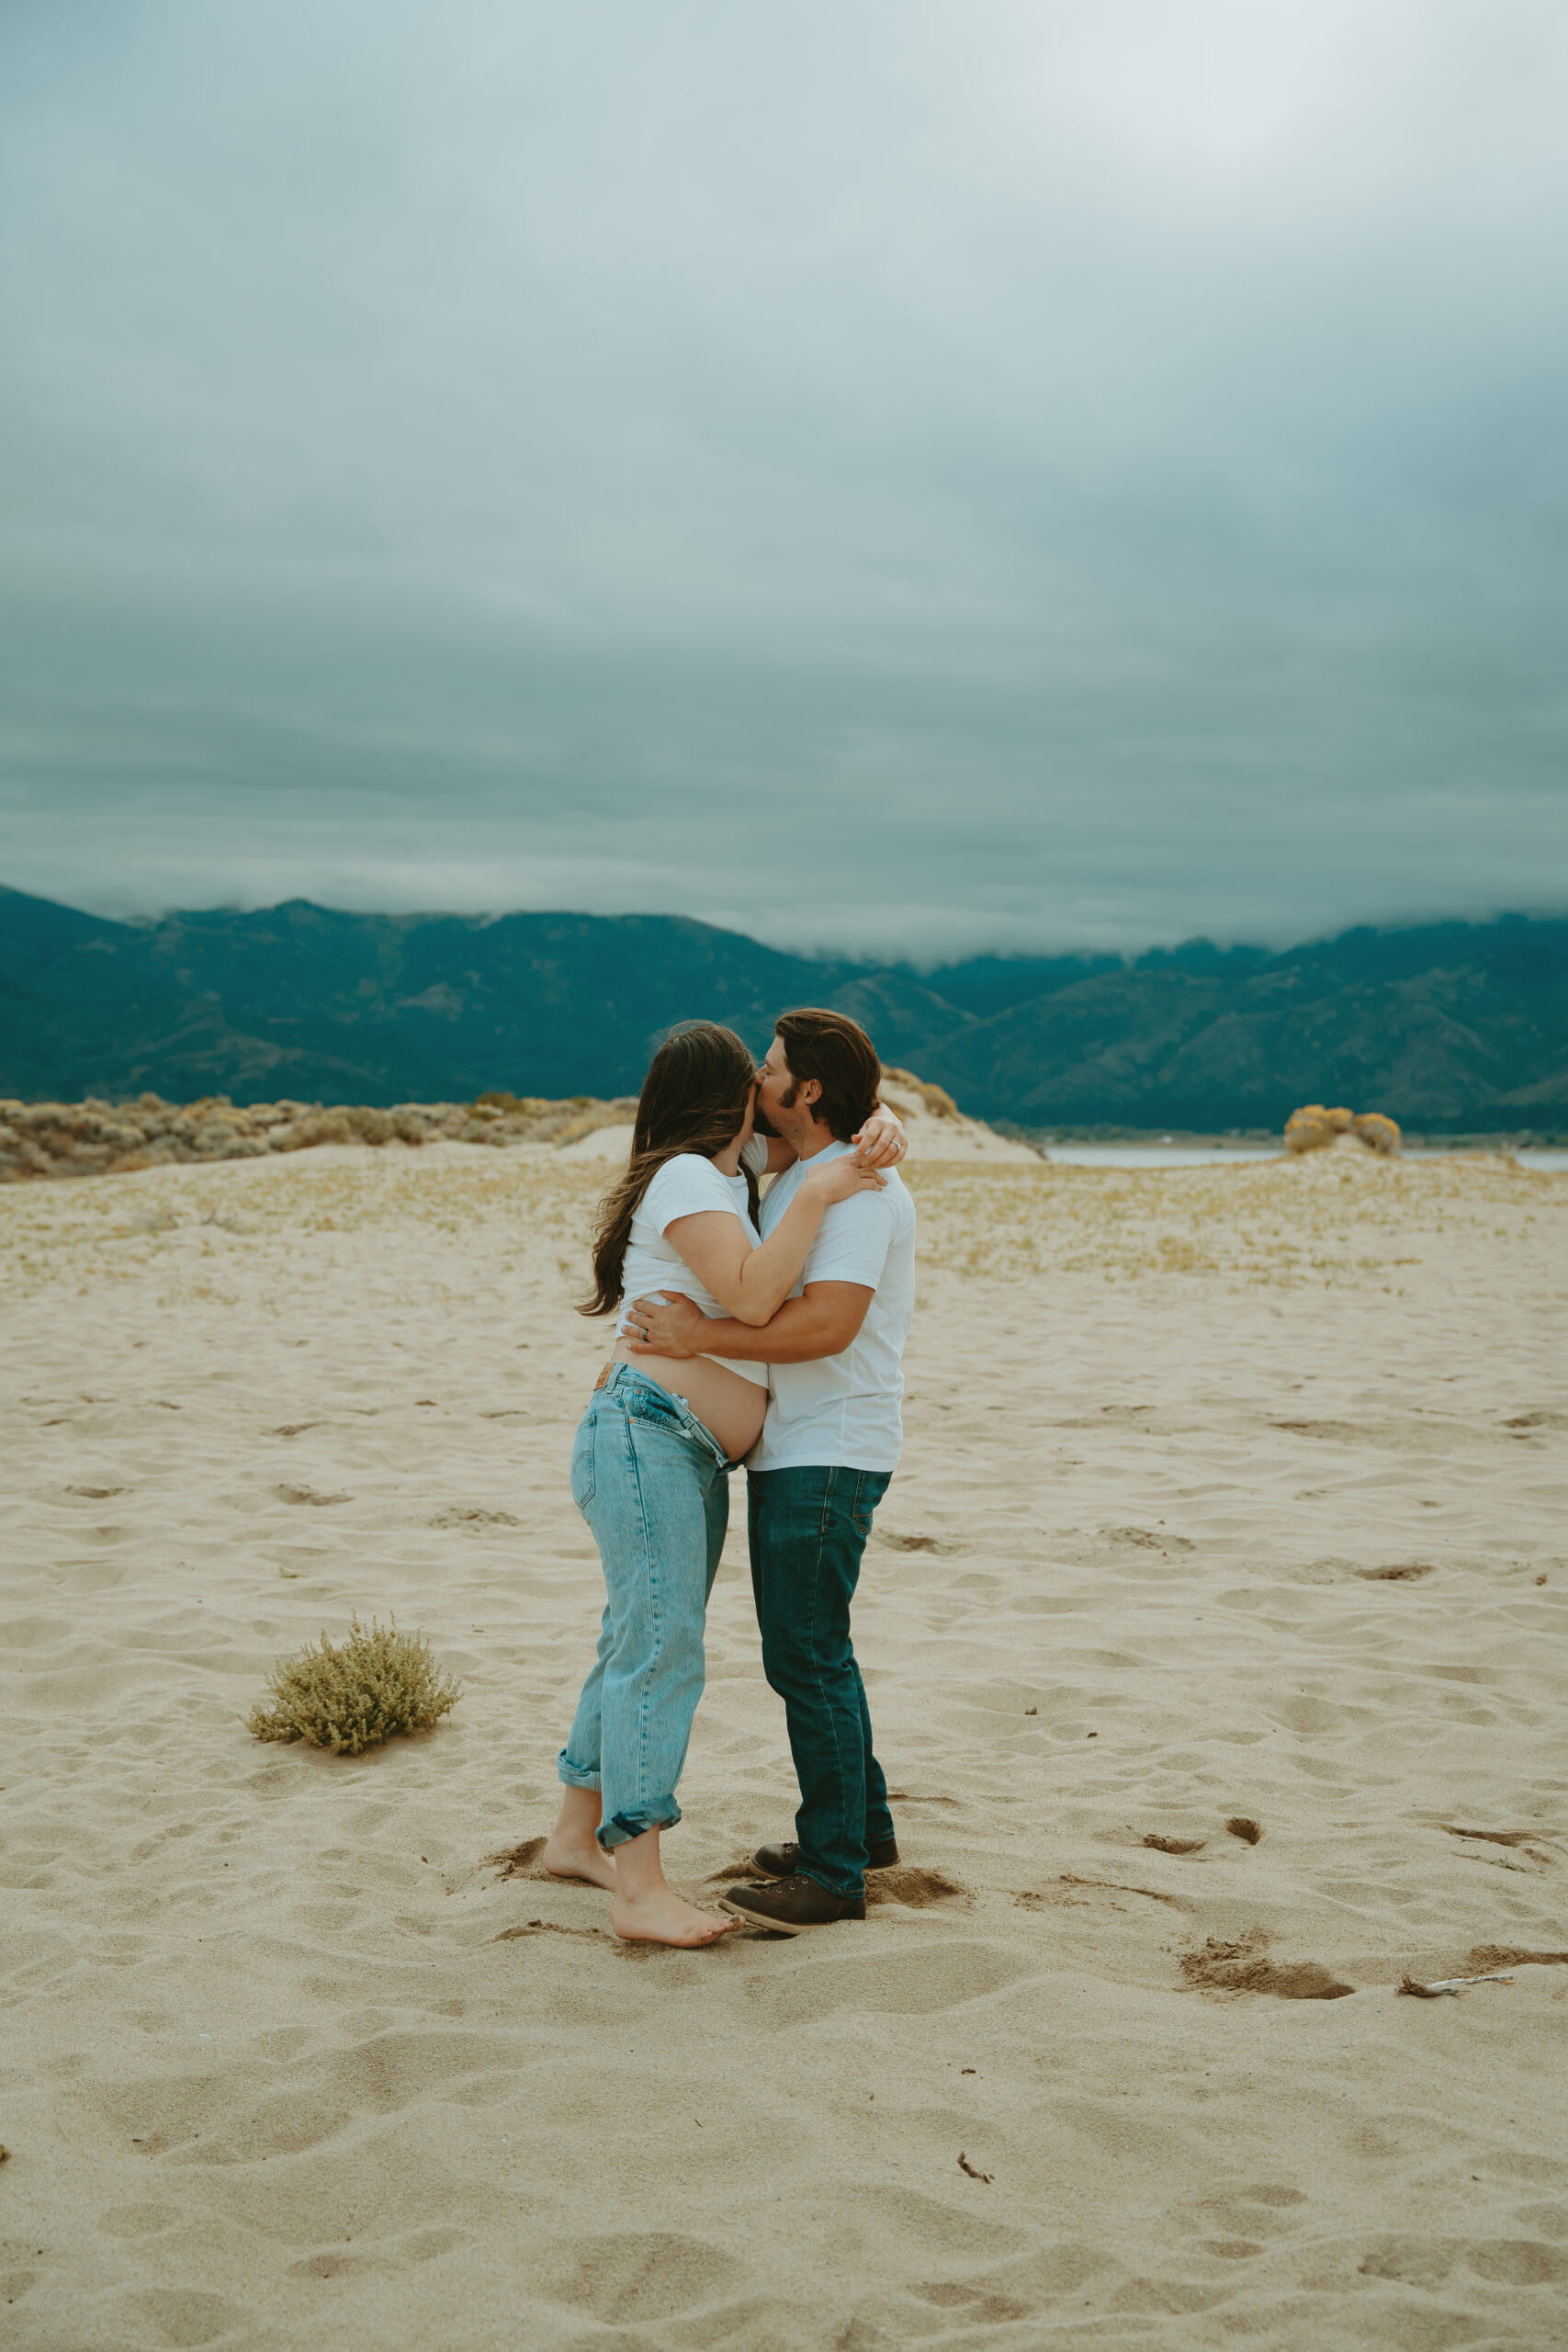 A maternity photoshoot, set amidst the stunning blue-green Nevada Mountains and golden-brown Washoe Valley fields, evokes nostalgia. The simplicity of the overall aesthetic lends a charmingly rustic yet romantic ambiance to every moment shared between the couple.